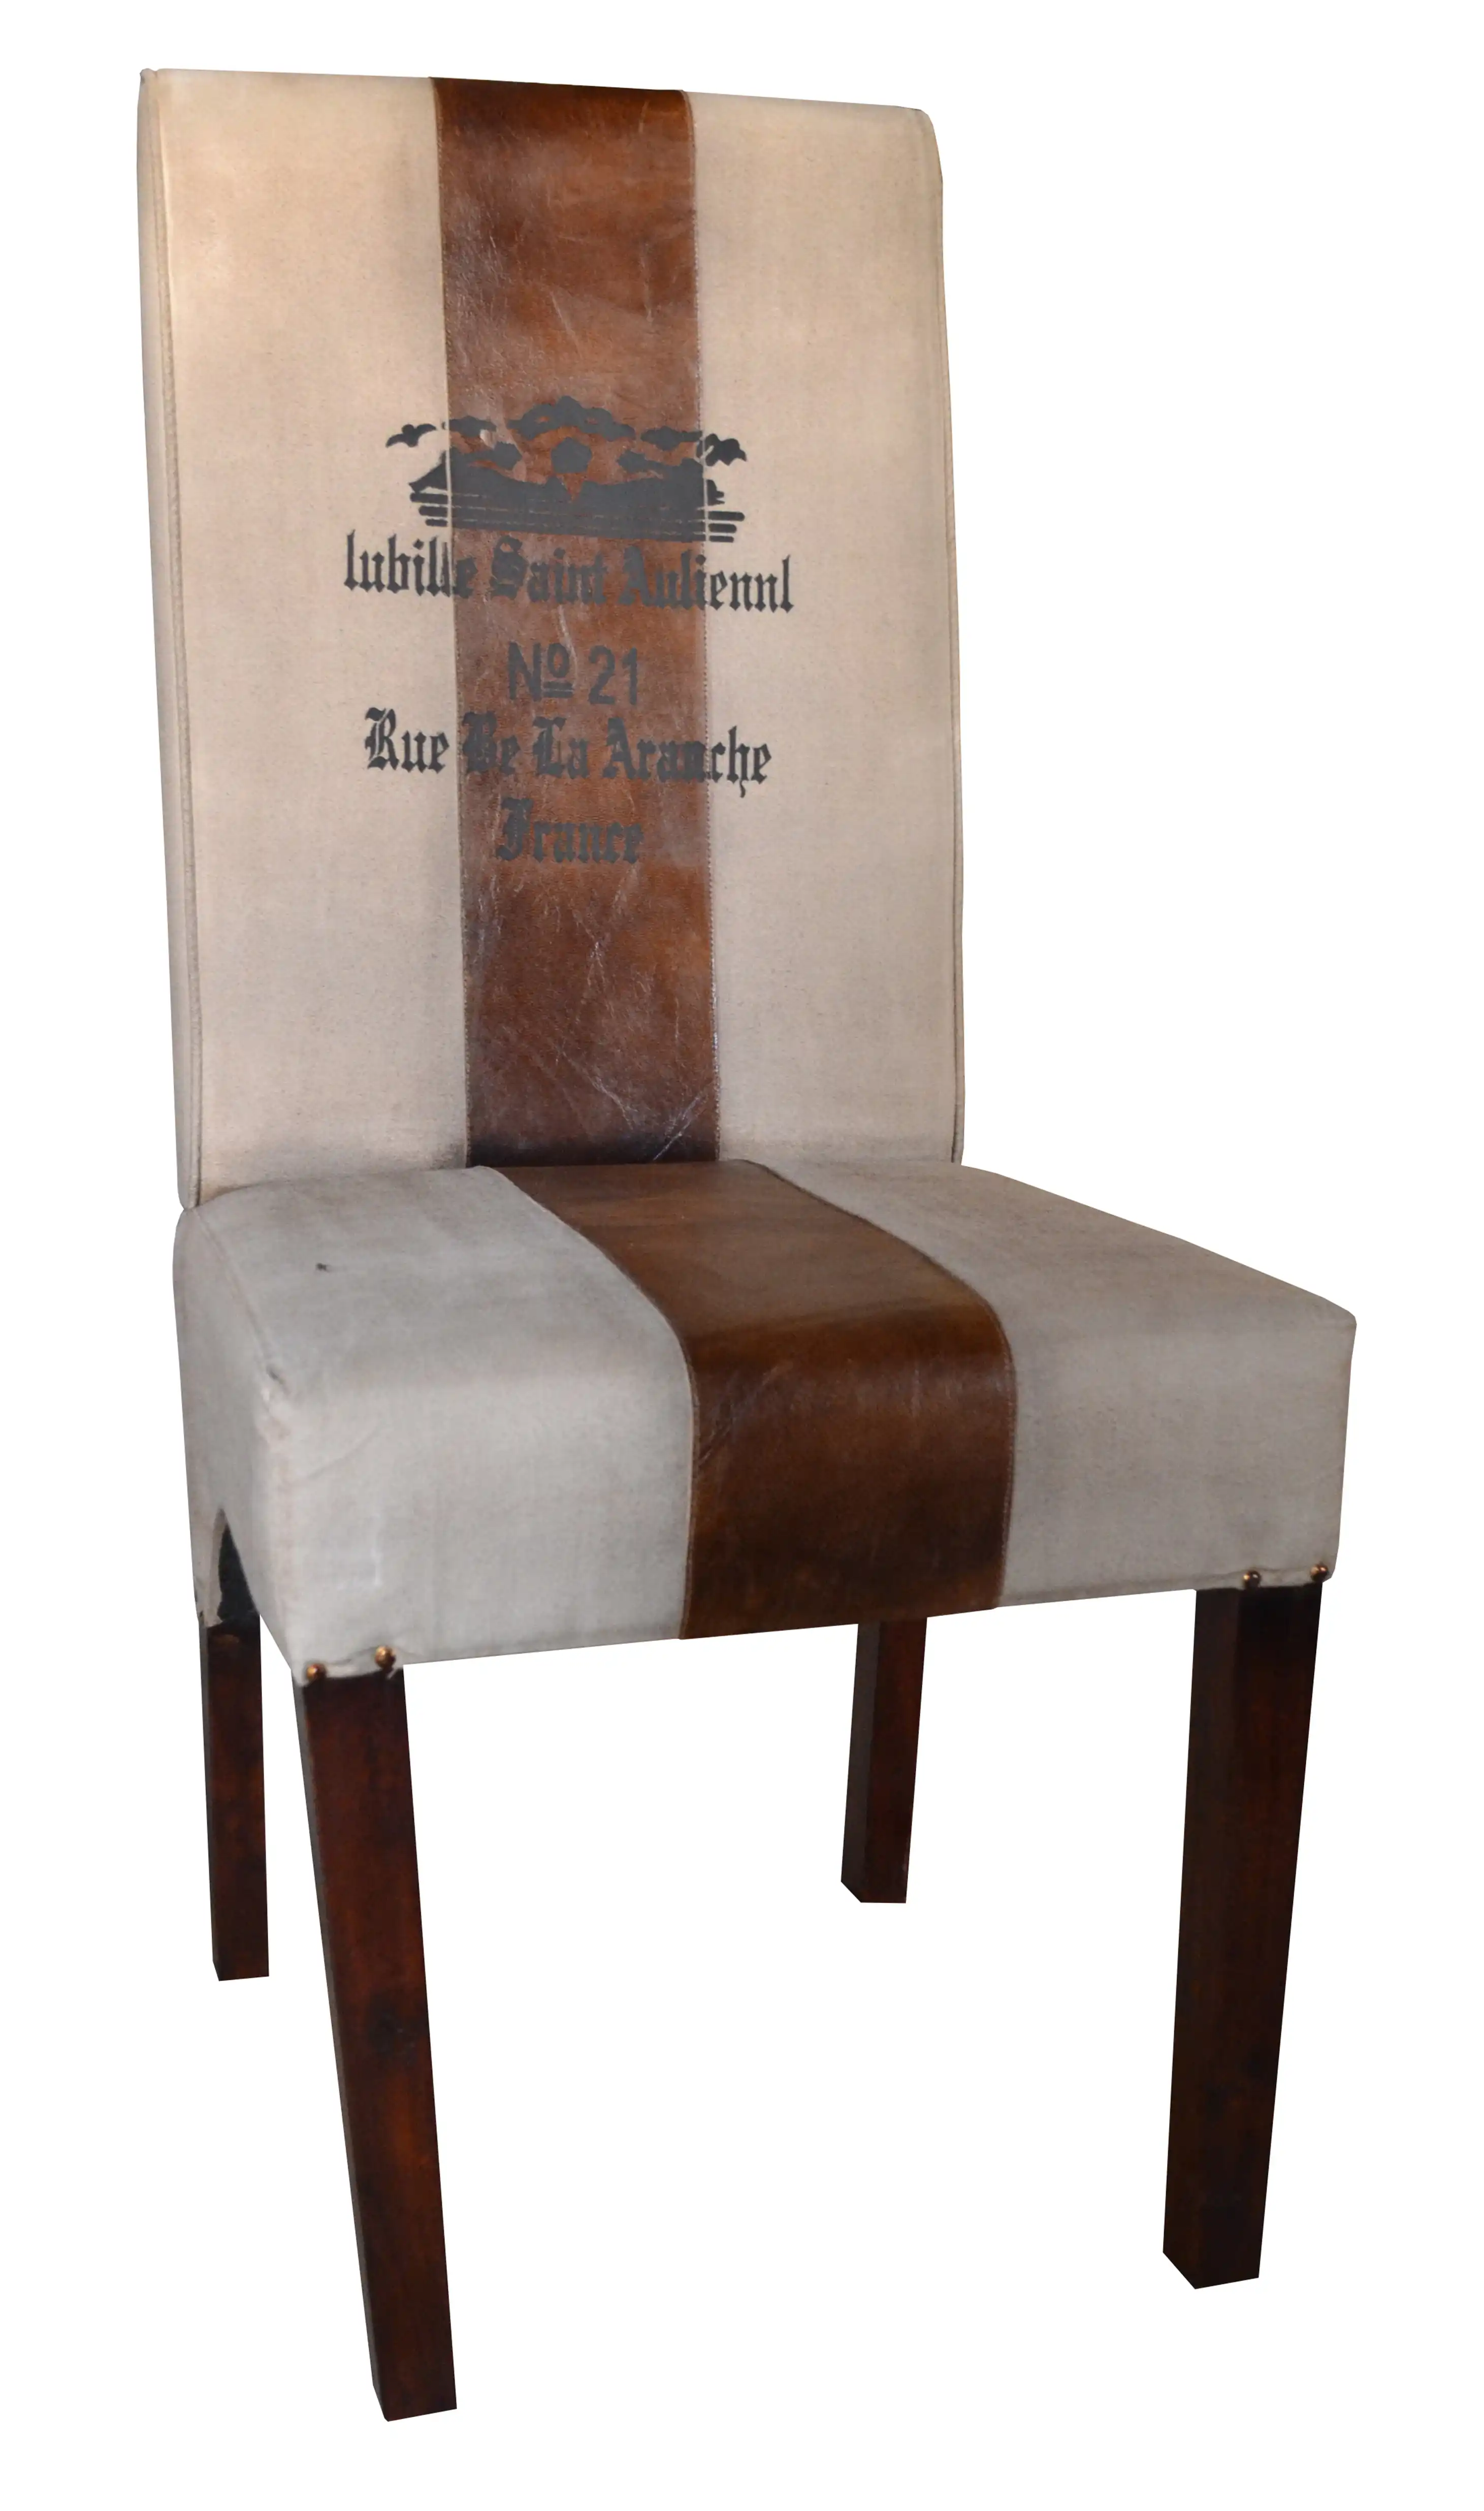 Reclaimed Mango Wood Chair with Cushion Covered SeatSet of 2 - popular handicrafts